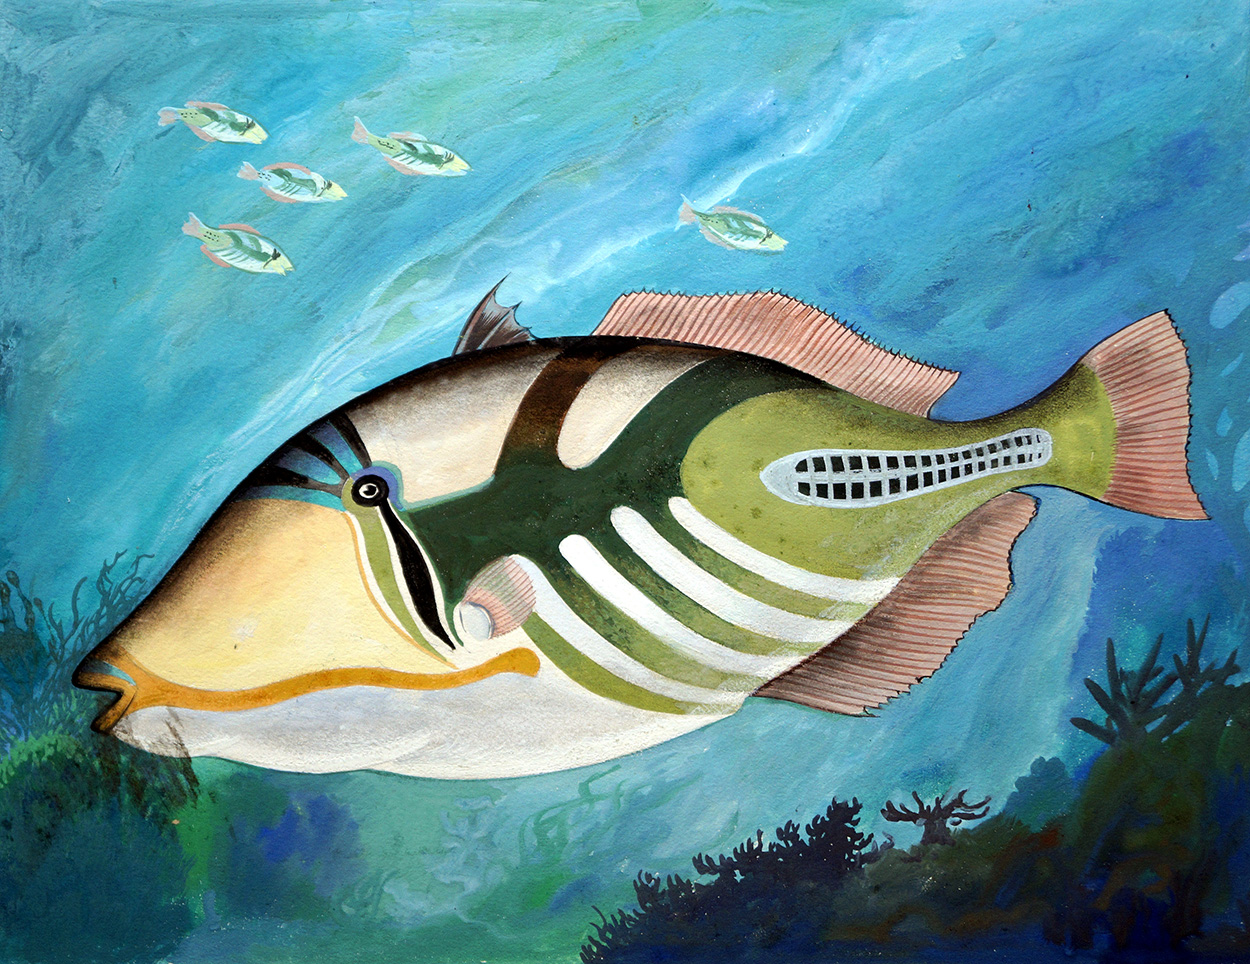 Tropical Fish (Original) art by Clive Uptton Art at The Illustration Art Gallery